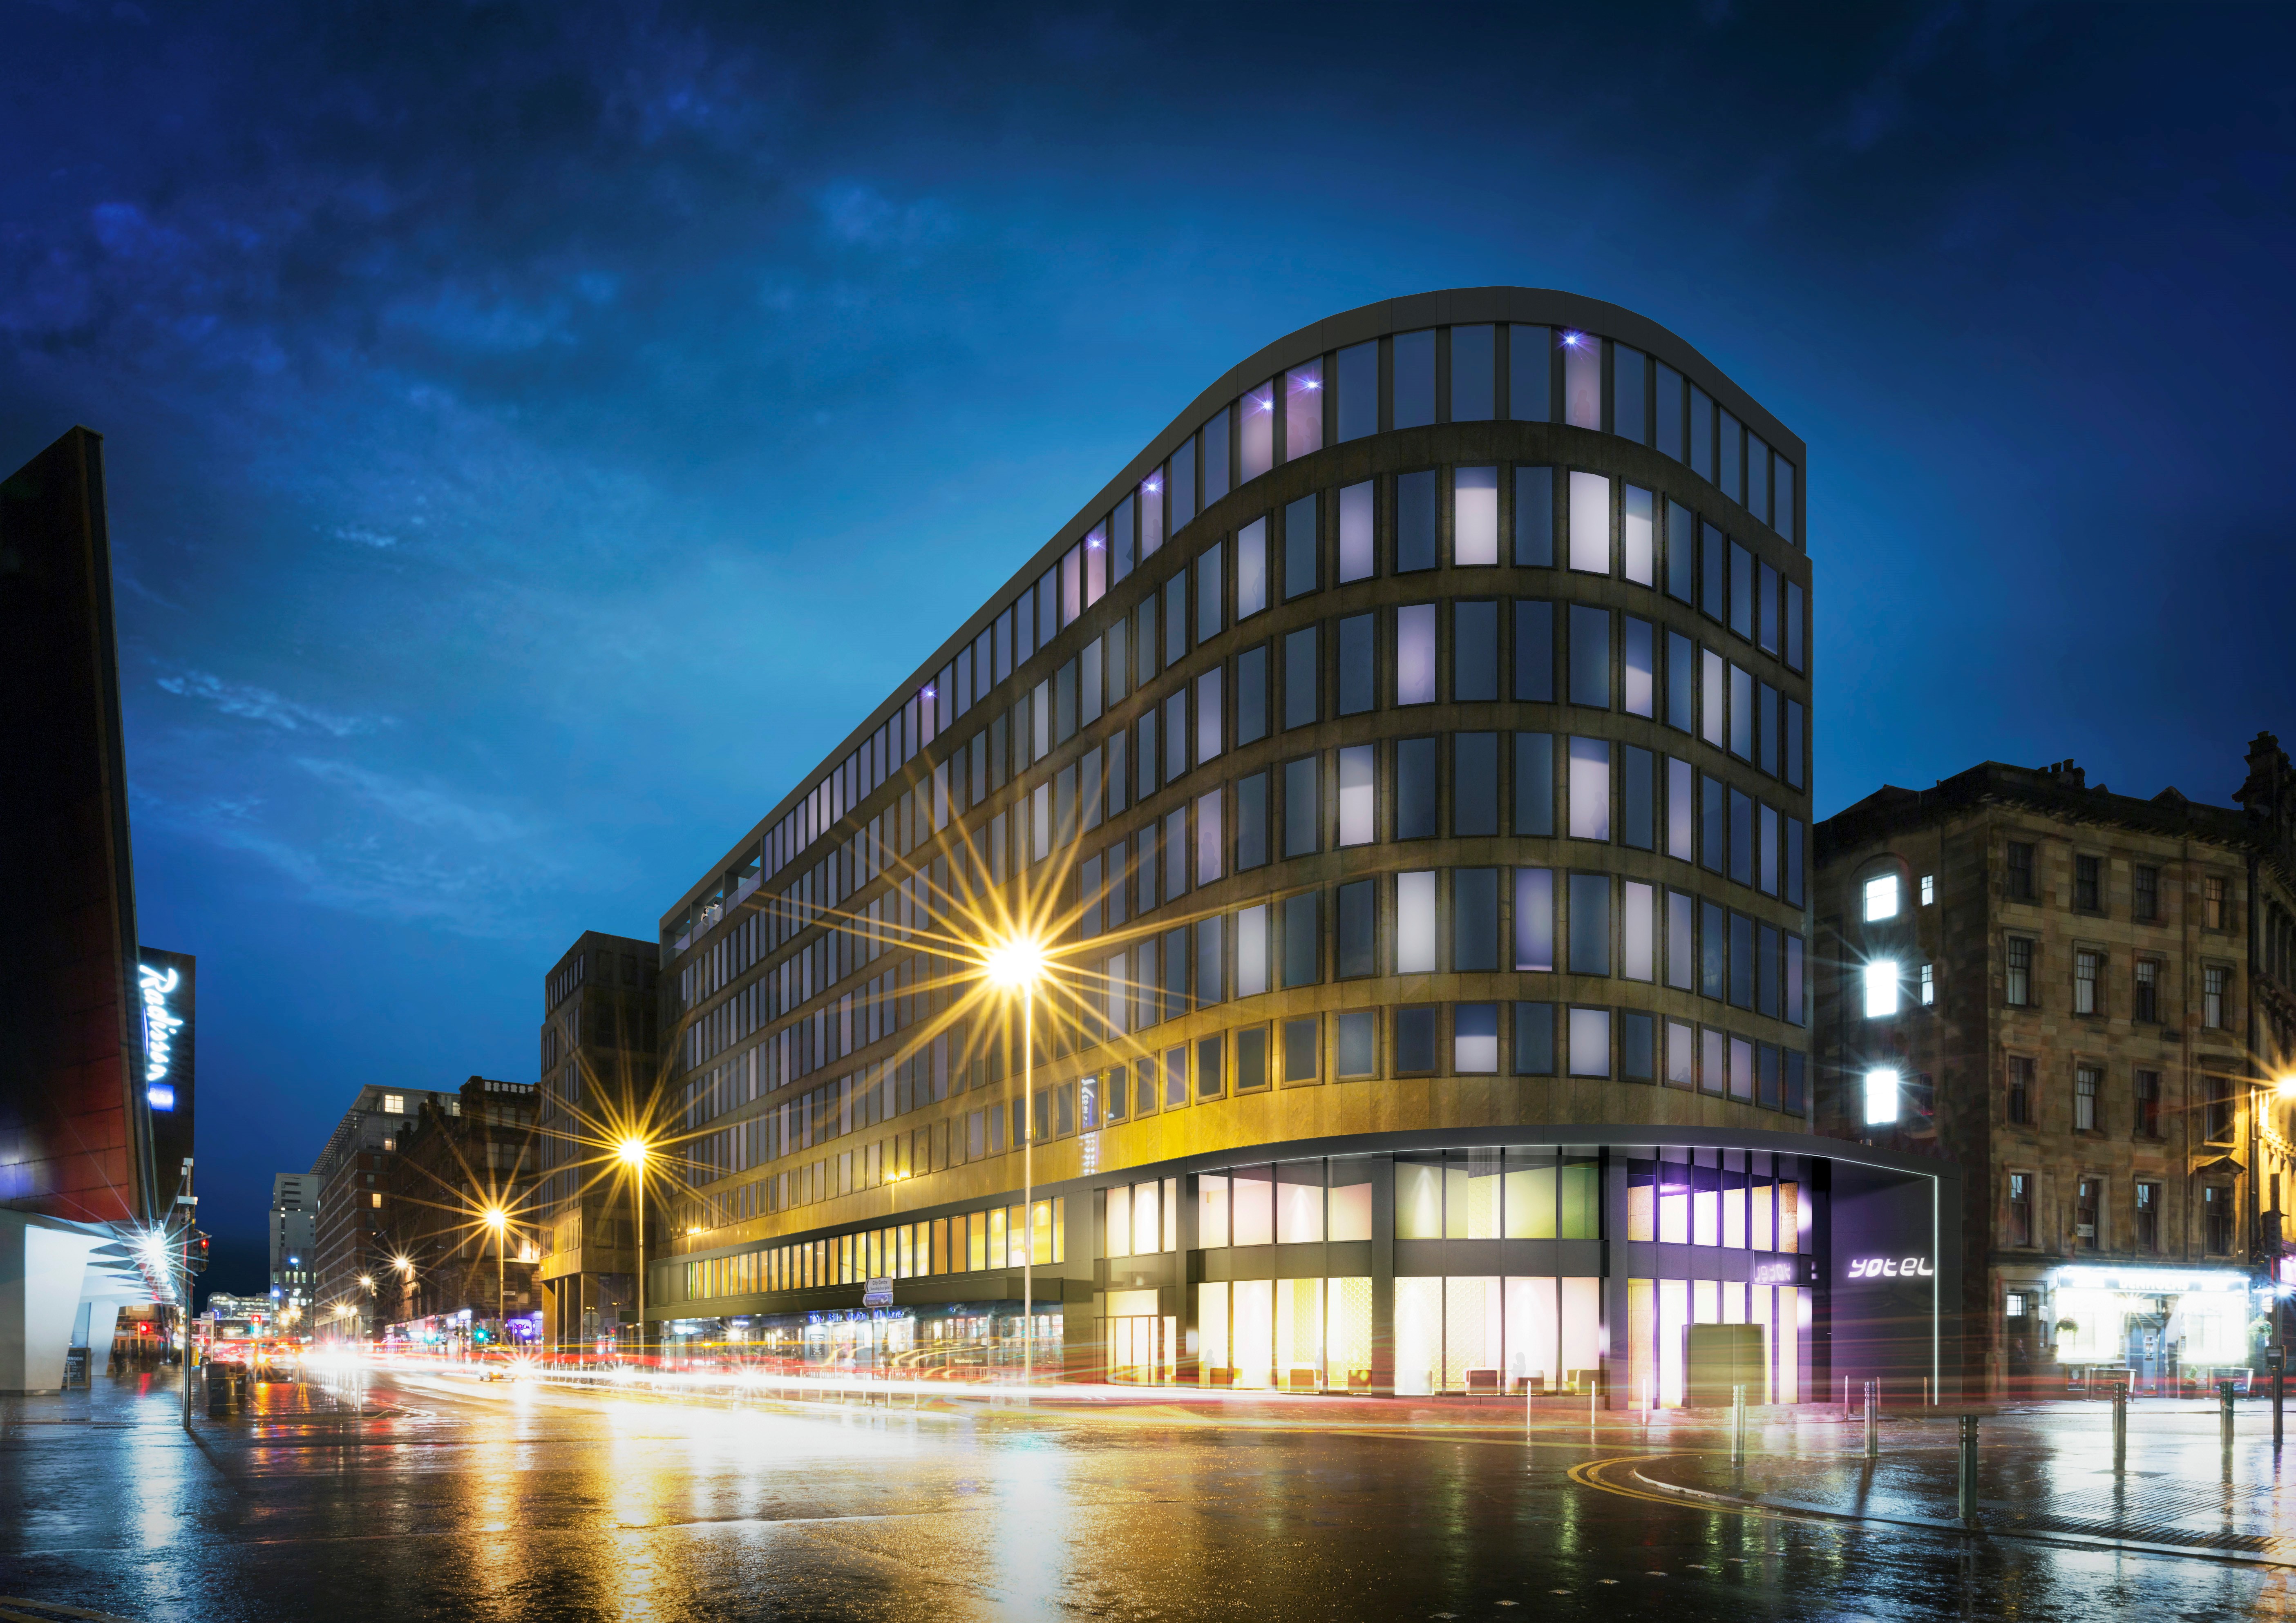 Yotel has set plans to open its second hotel in Scotland and fifth in the UK